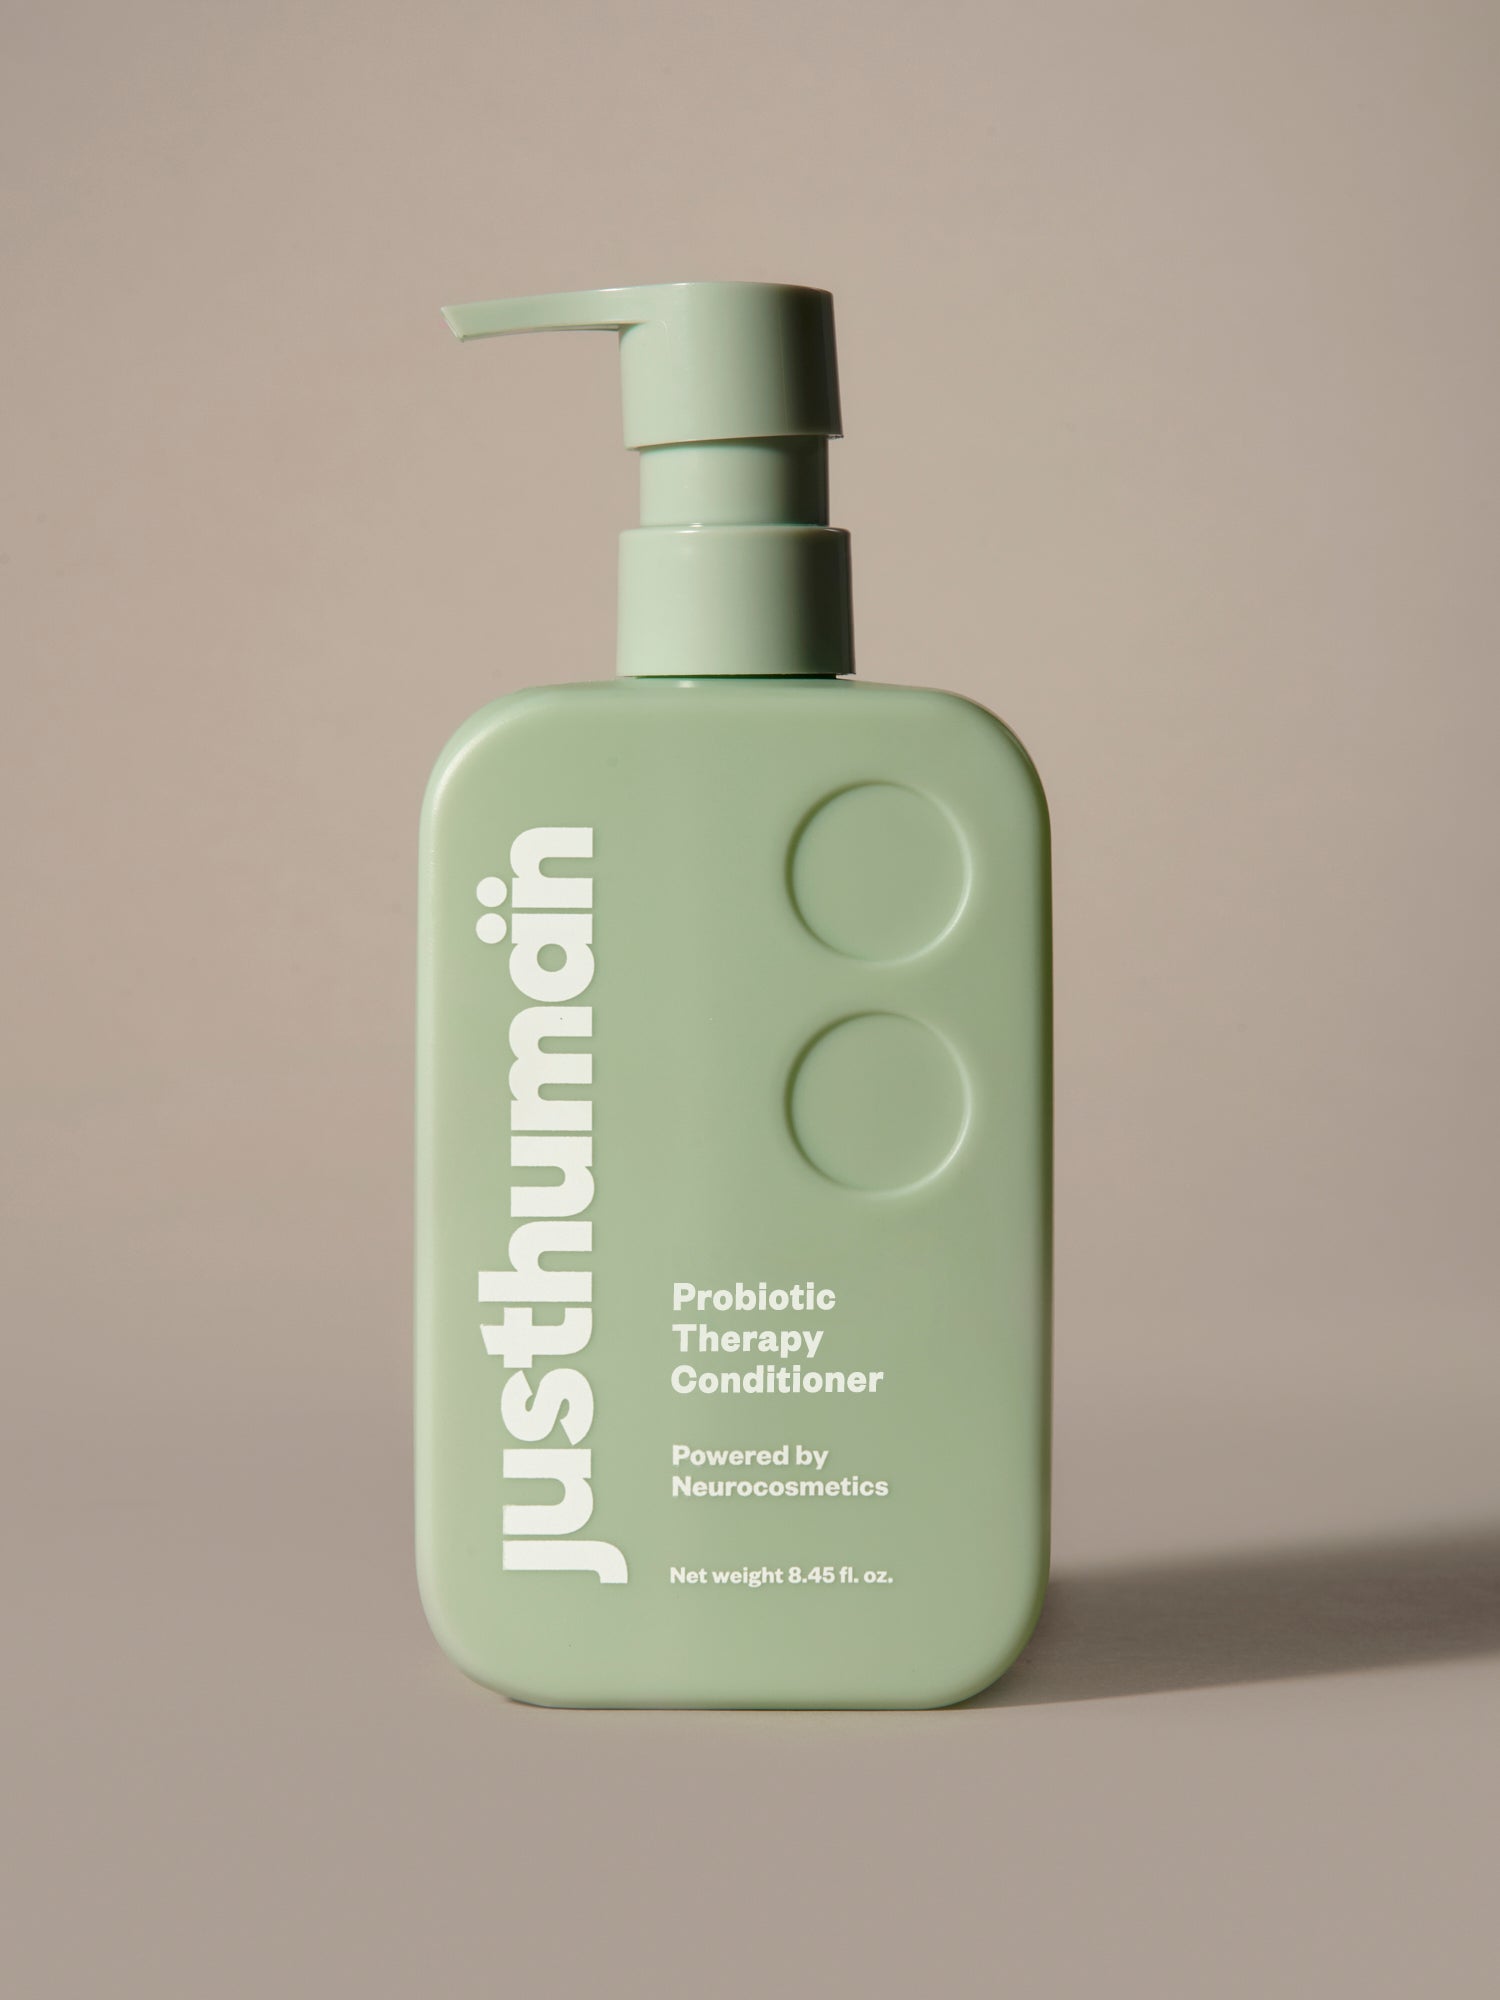 Probiotic Therapy Conditioner JustHuman